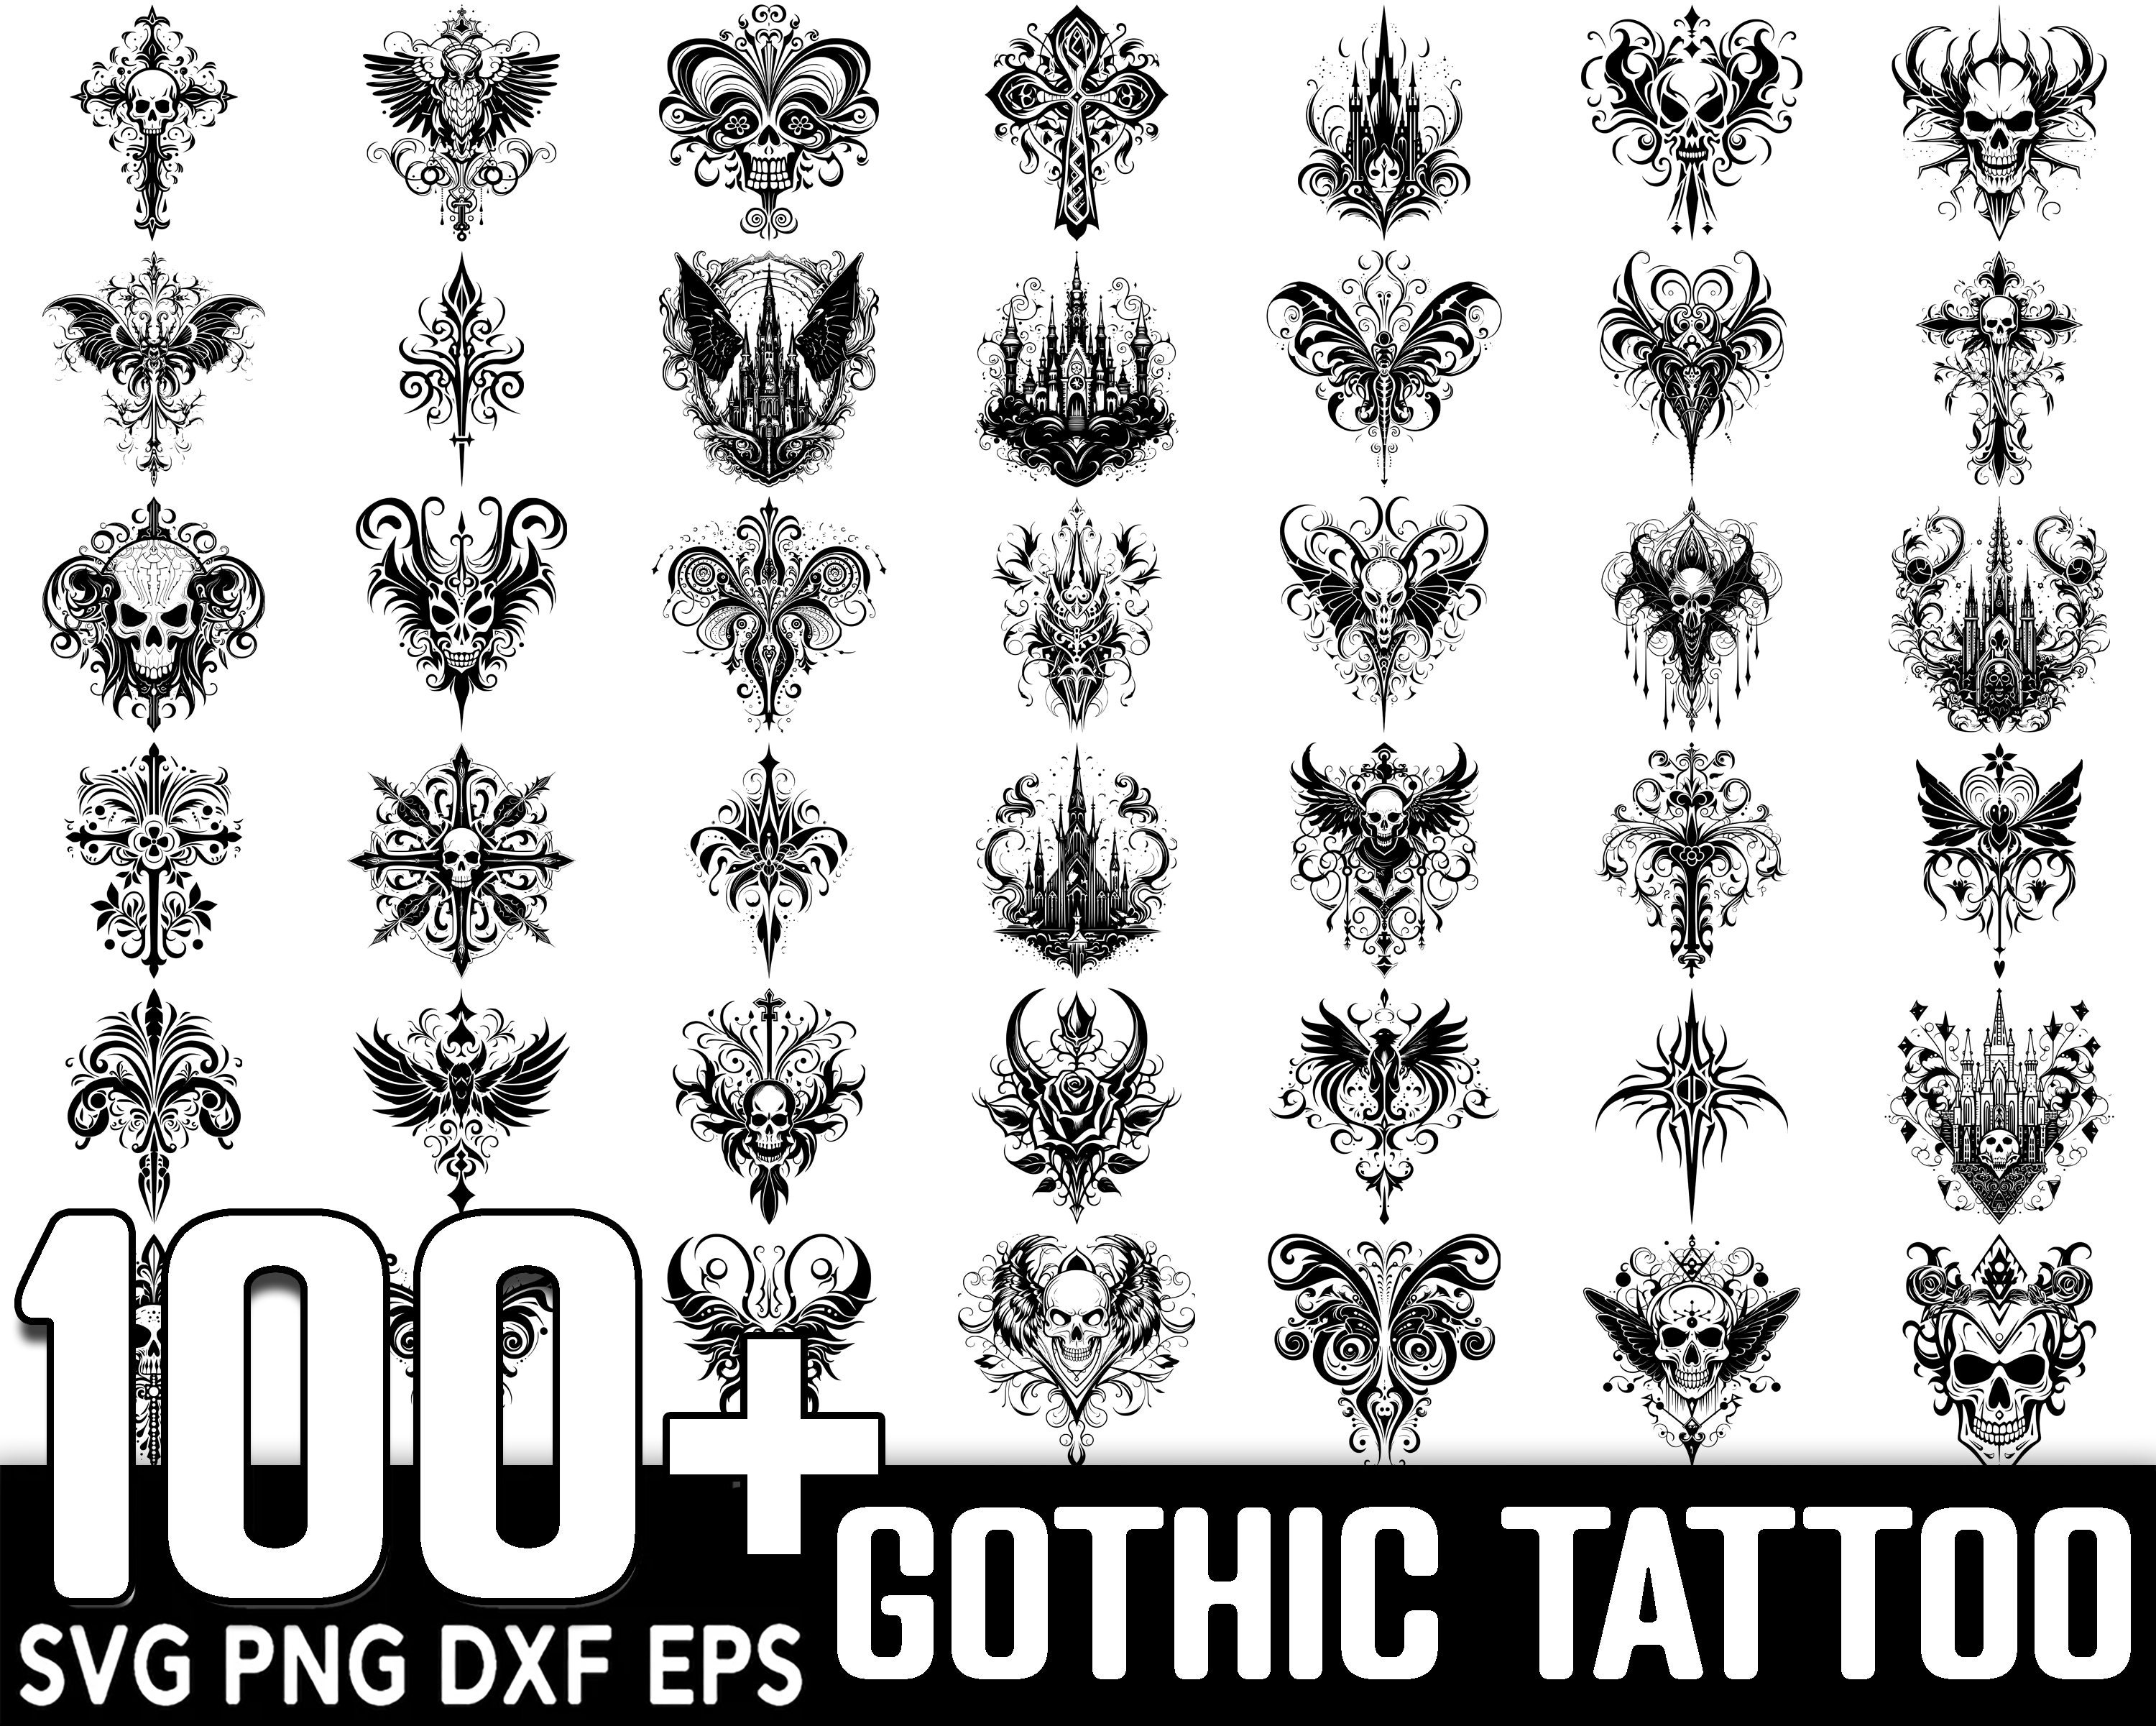 Goth inspired tattoo design by QiQiArtStation on DeviantArt